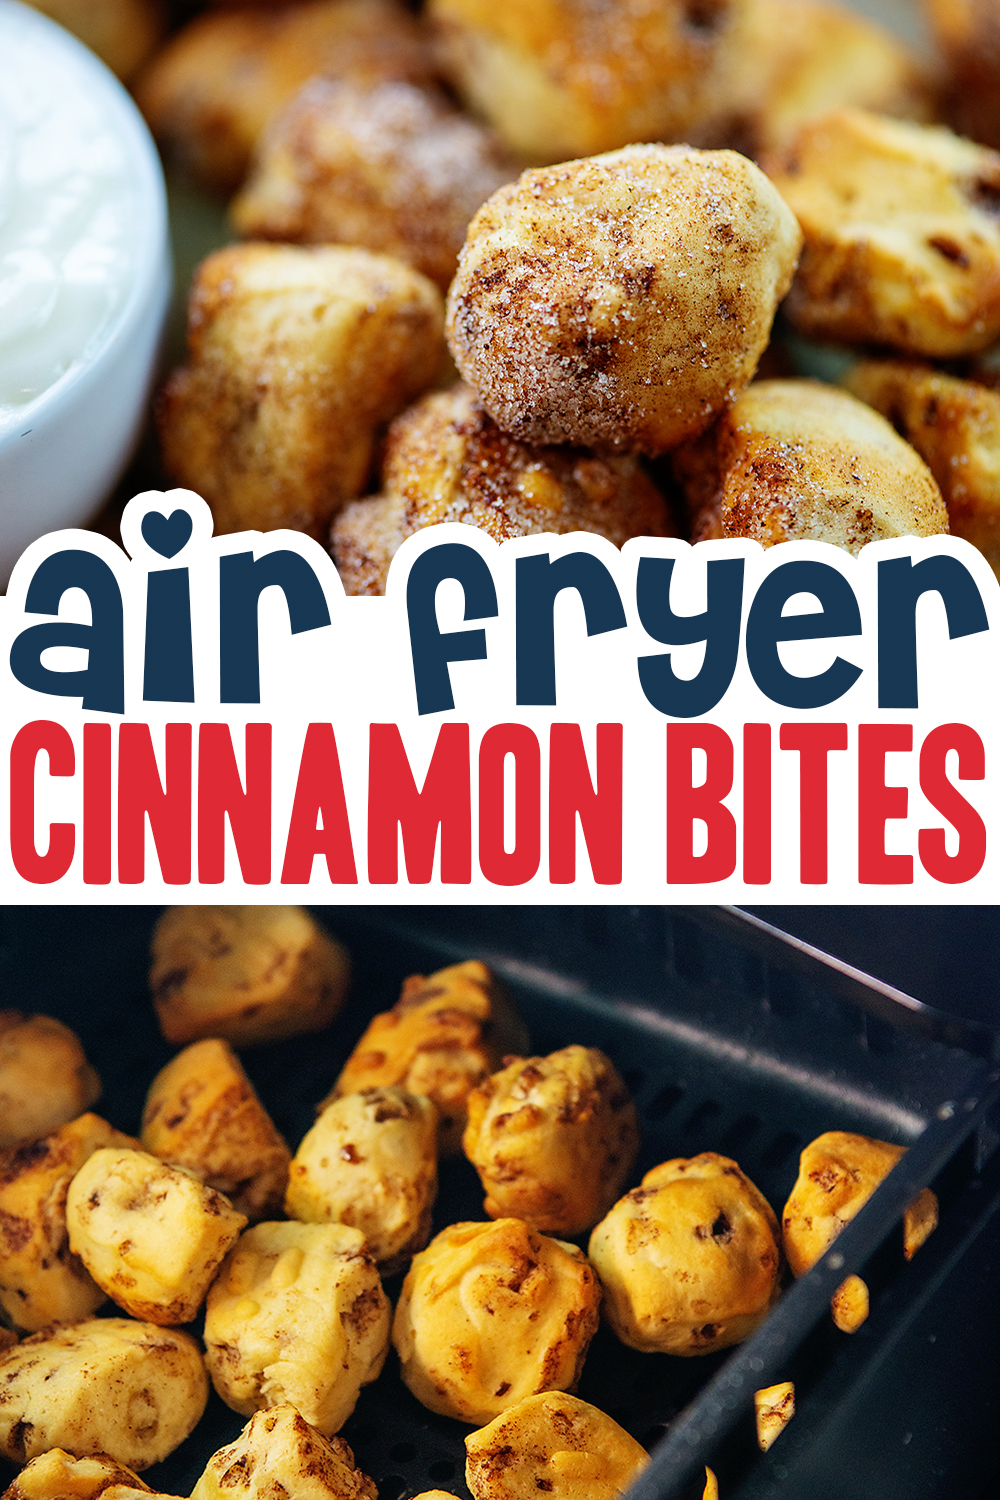 This hack for cinnamon bites makes this breakfast snack super easy to make and they taste amazing out of the air fryer!